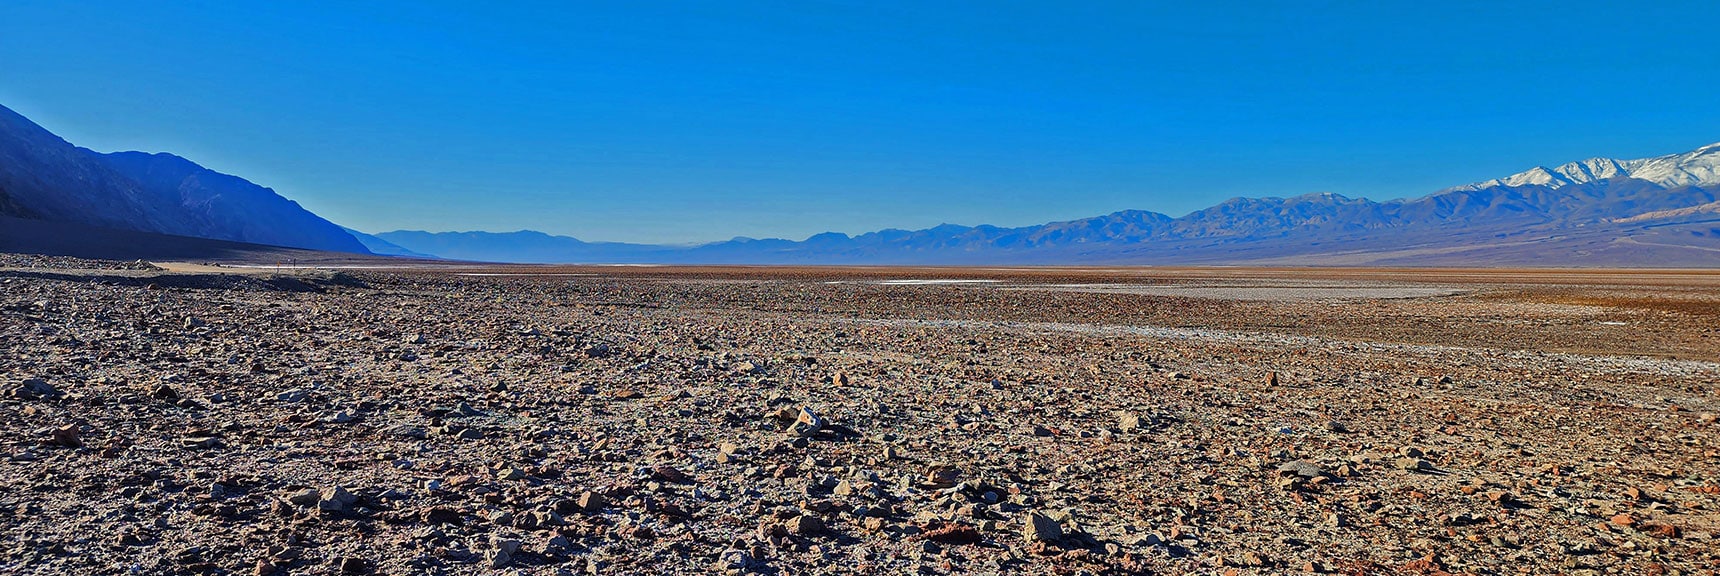 Death Valley View South from Badwater Road | Death Valley Crossing | Death Valley National Park, California | David Smith | LasVegasAreaTrails.com